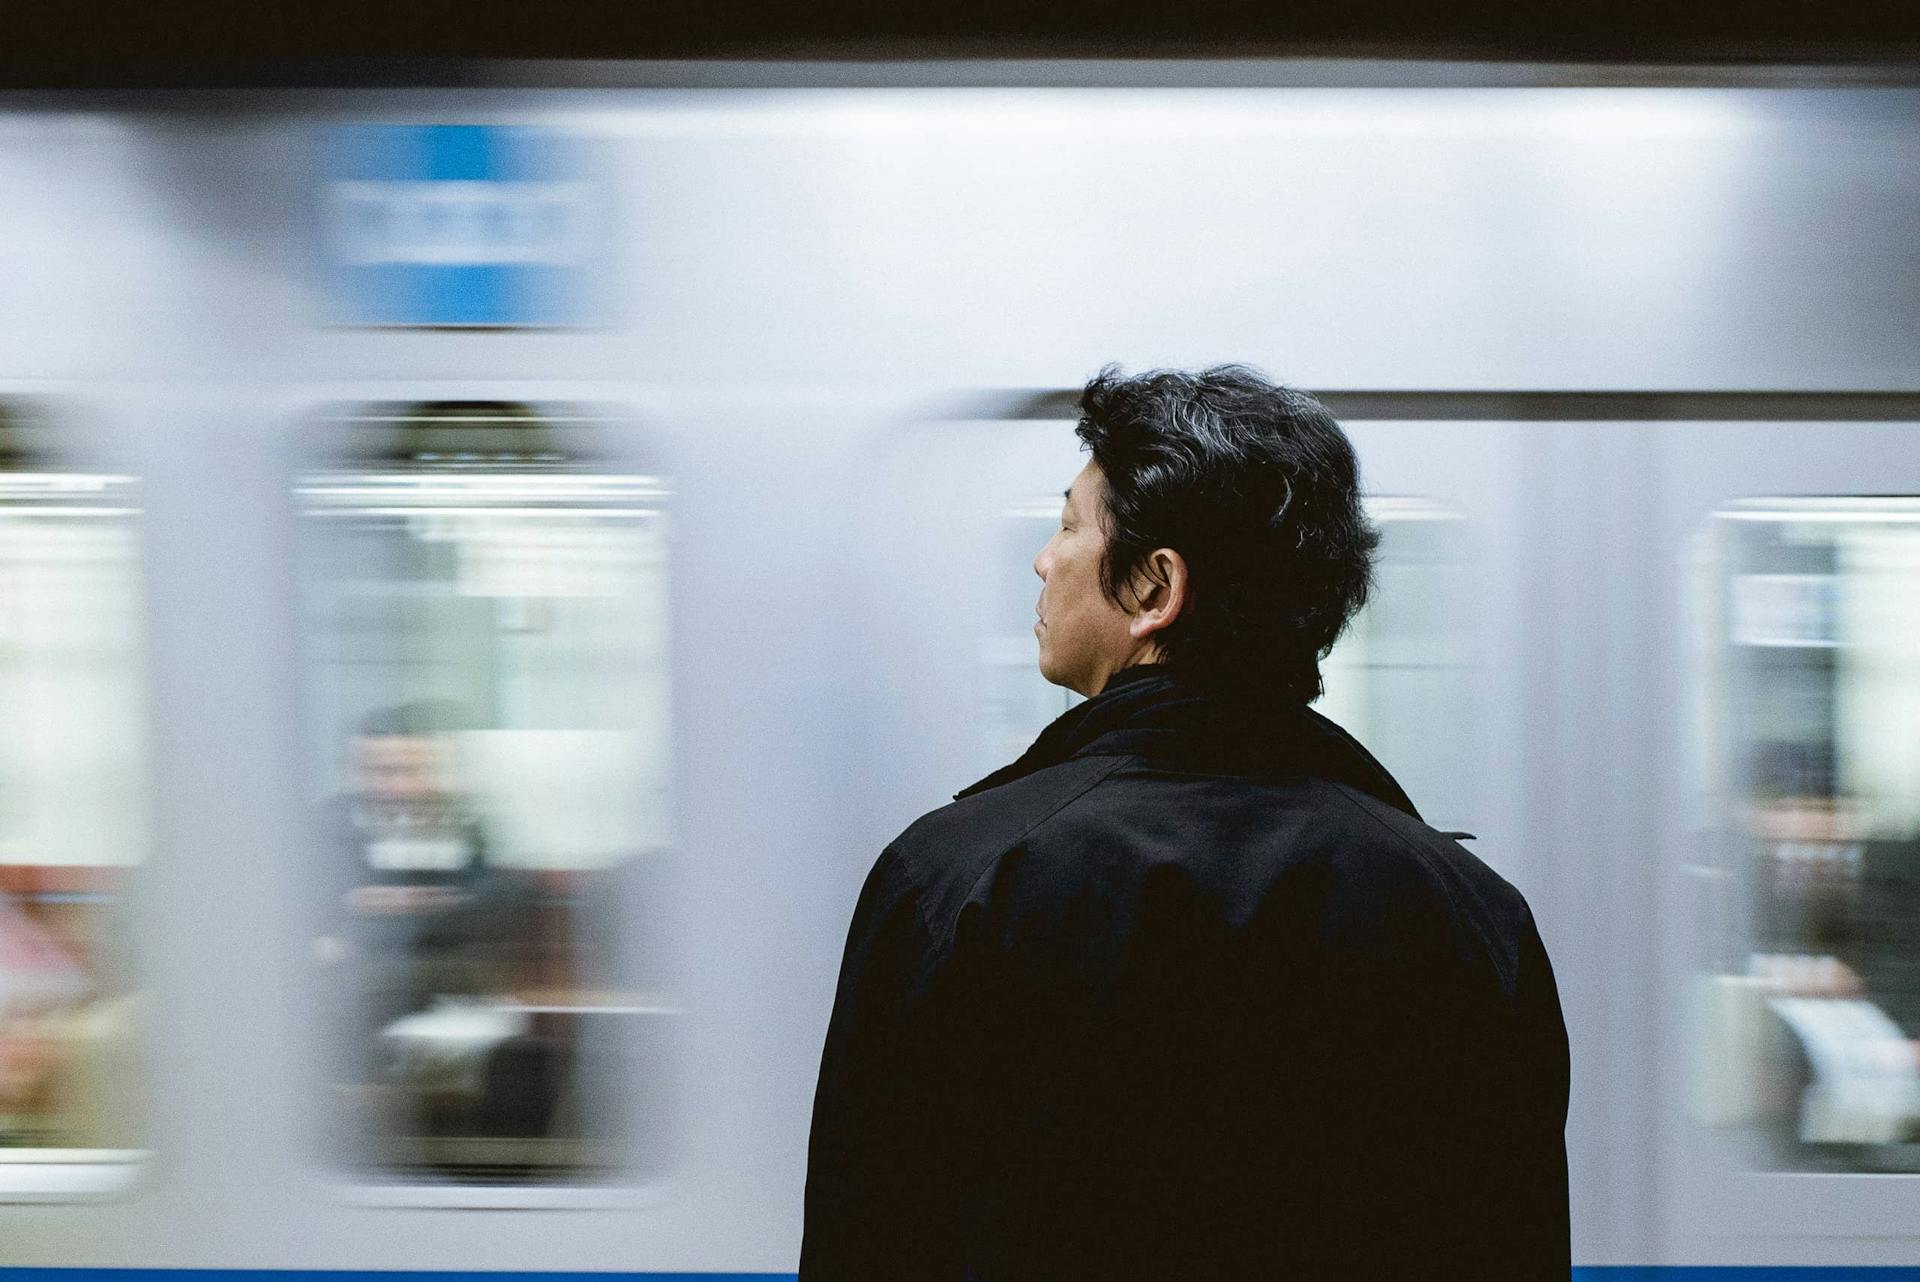 How To Have A More Mindful Commute